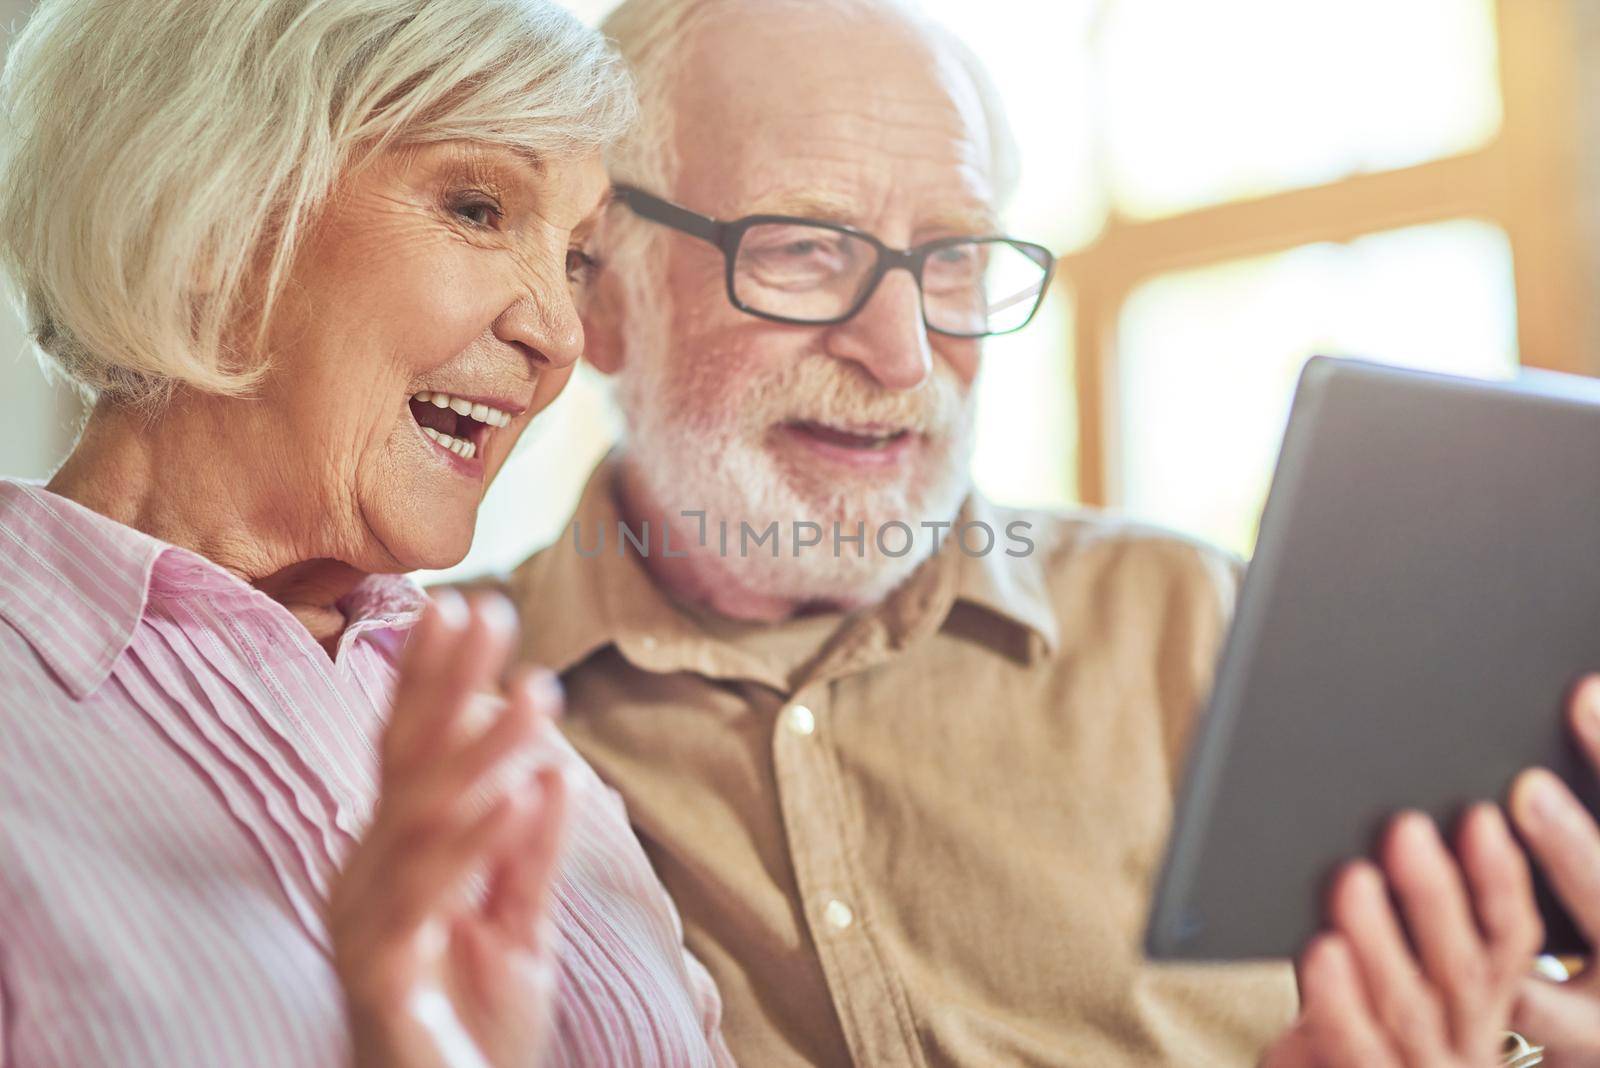 Close up of happy senior husband and wife using digital tablet and chatting during video call at home. Lifestyle concept